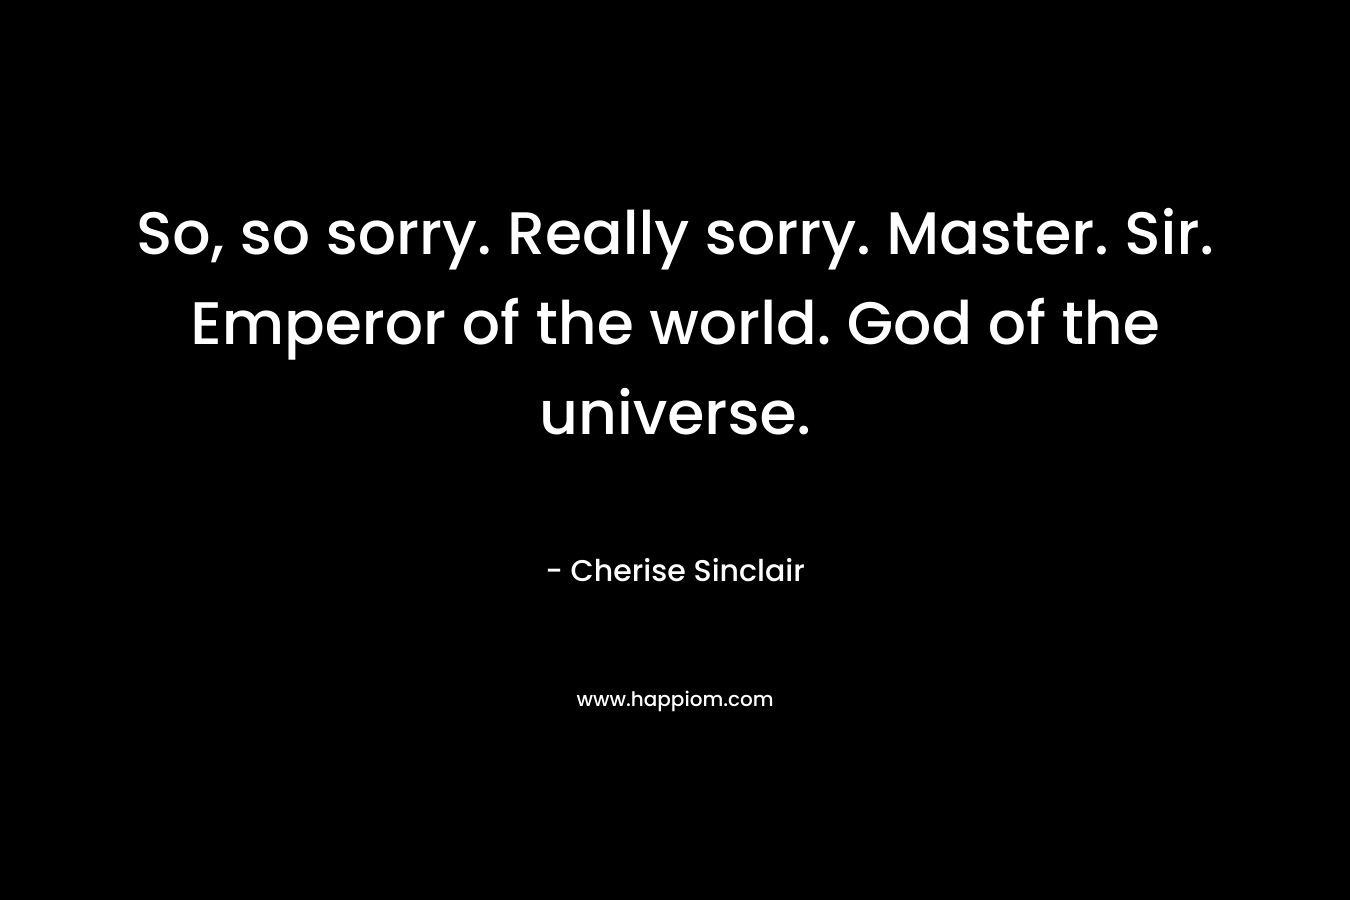 So, so sorry. Really sorry. Master. Sir. Emperor of the world. God of the universe.